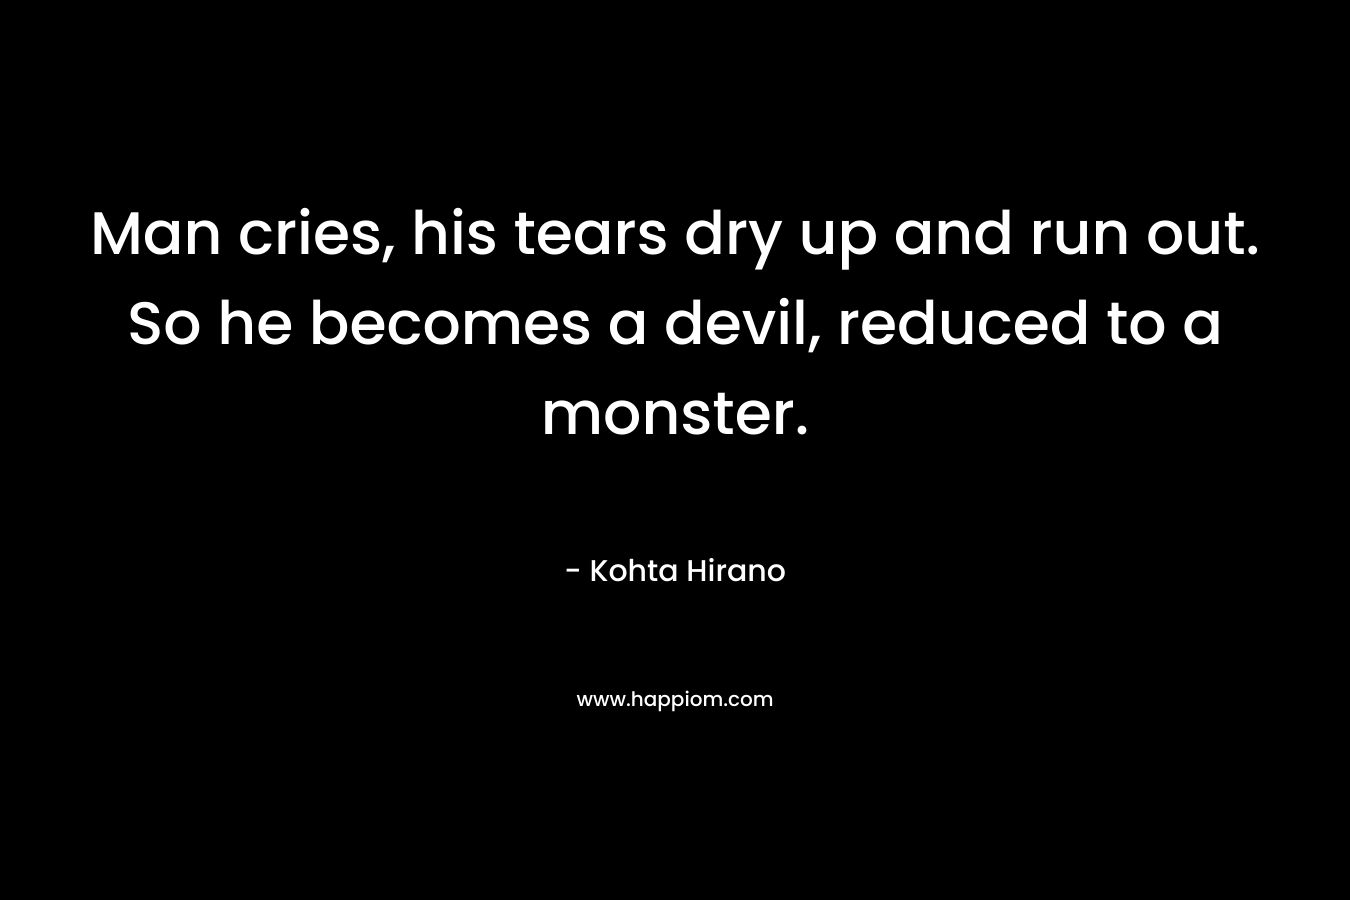 Man cries, his tears dry up and run out. So he becomes a devil, reduced to a monster. – Kohta Hirano